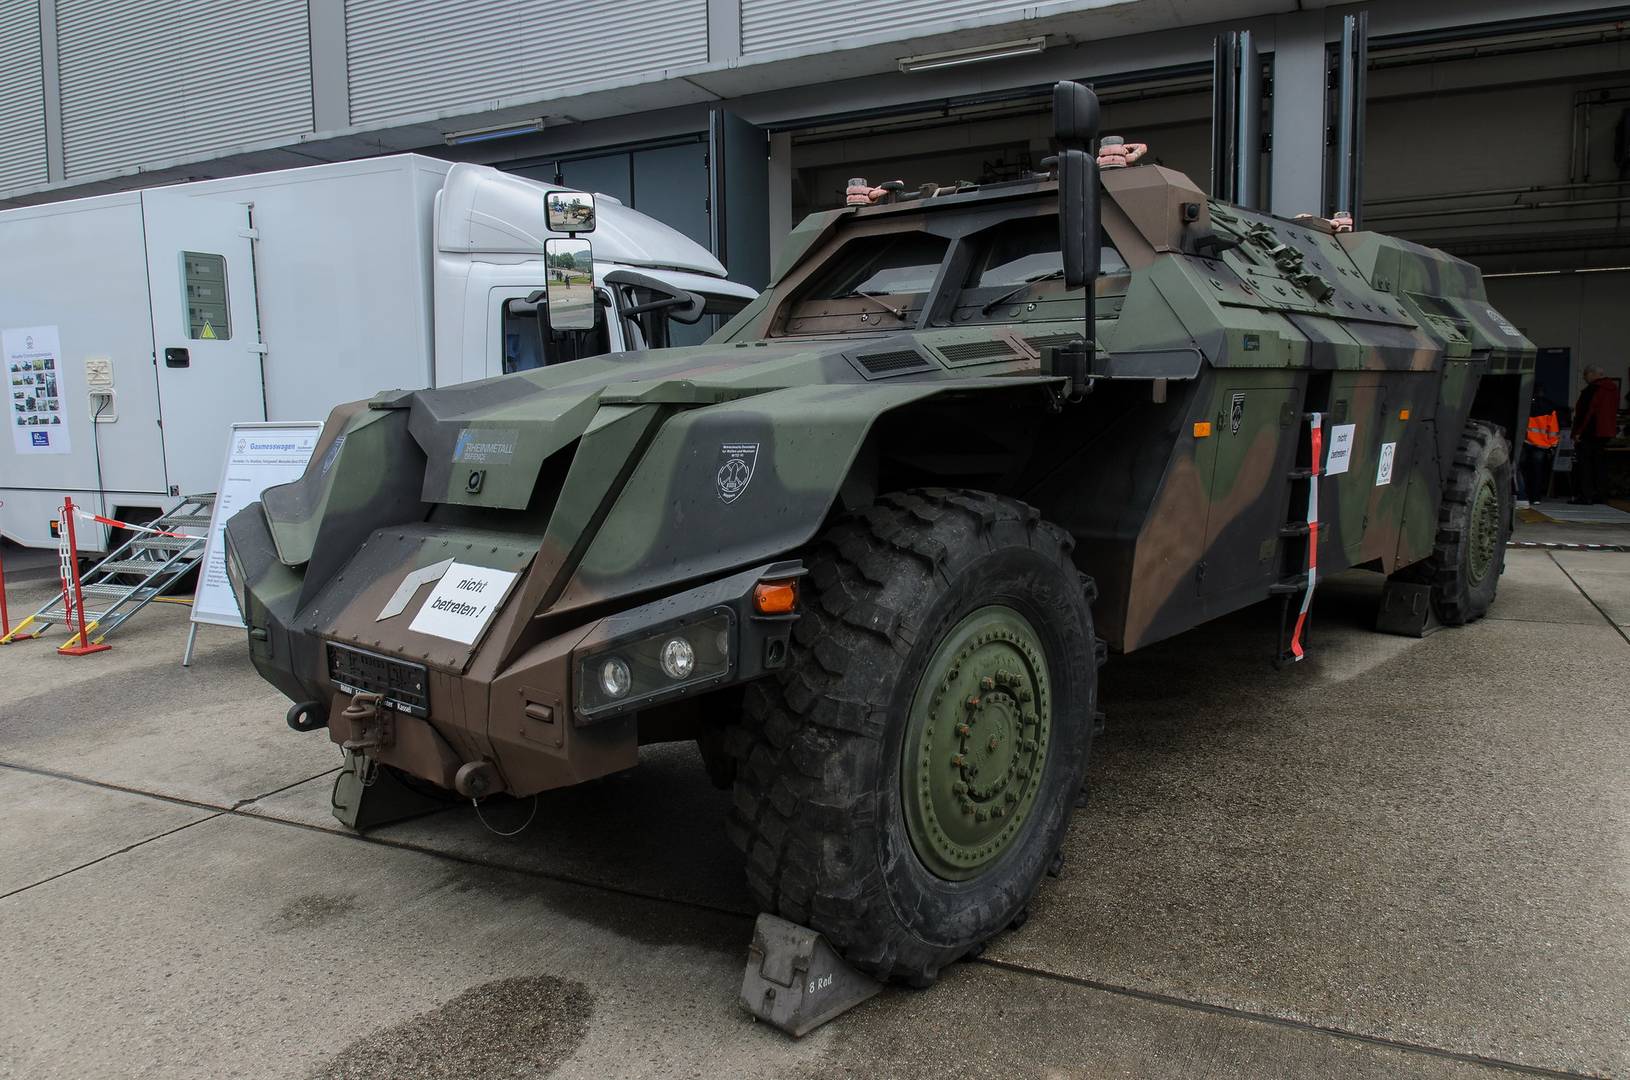 Image by CC BY-ND 2.0 270862 flickr.com Rheinmetall Concern's armored vehicle